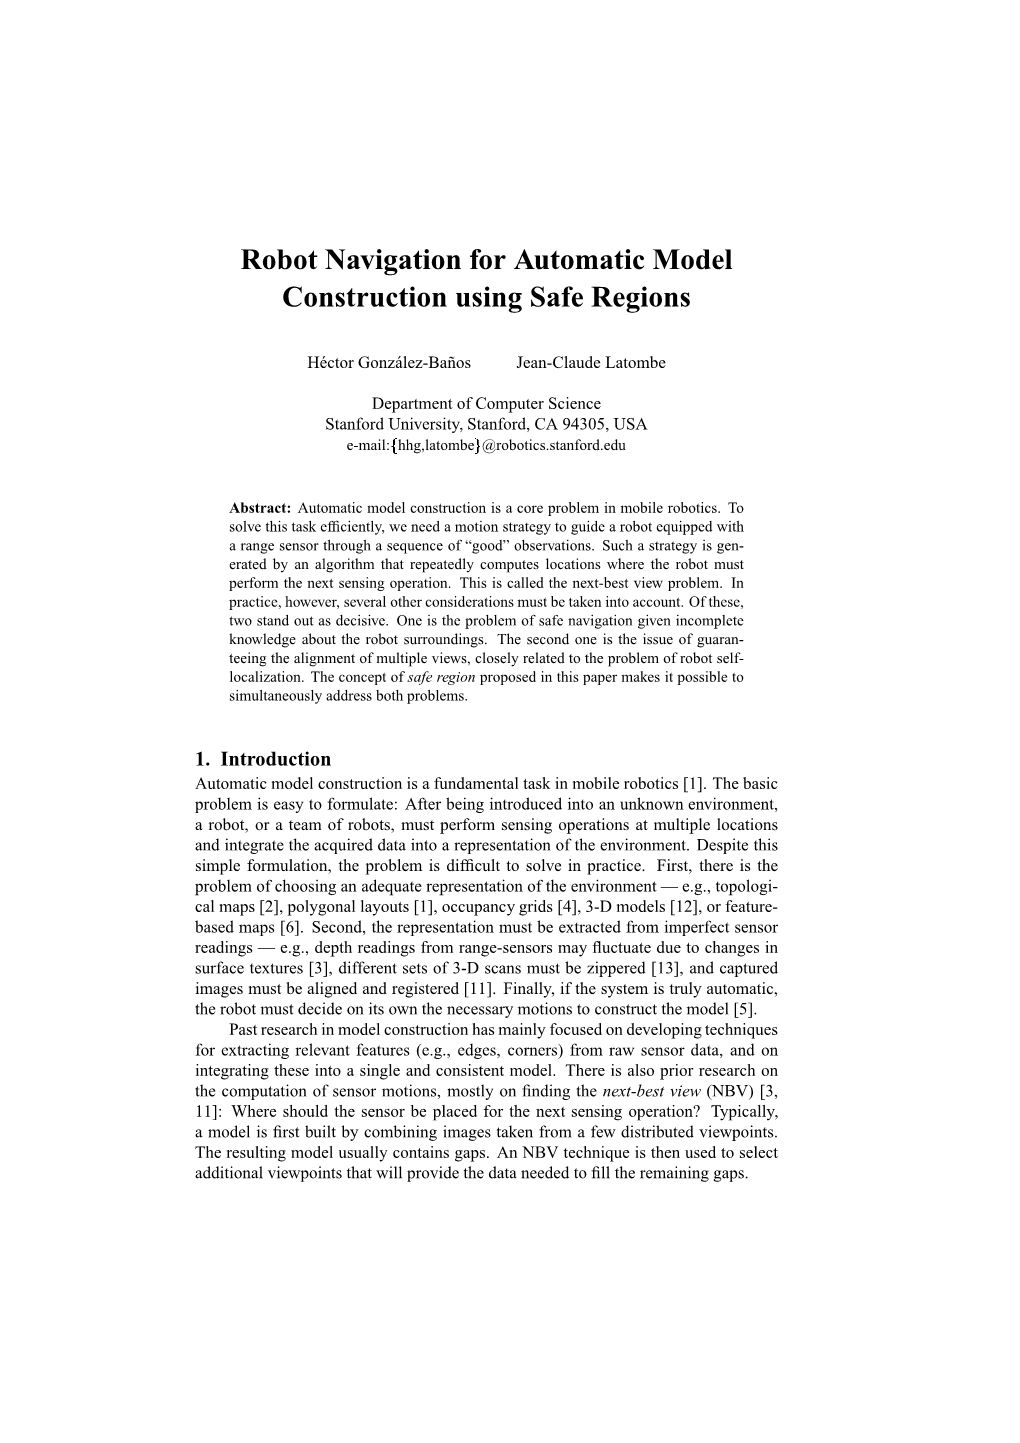 Robot Navigation for Automatic Model Construction Using Safe Regions